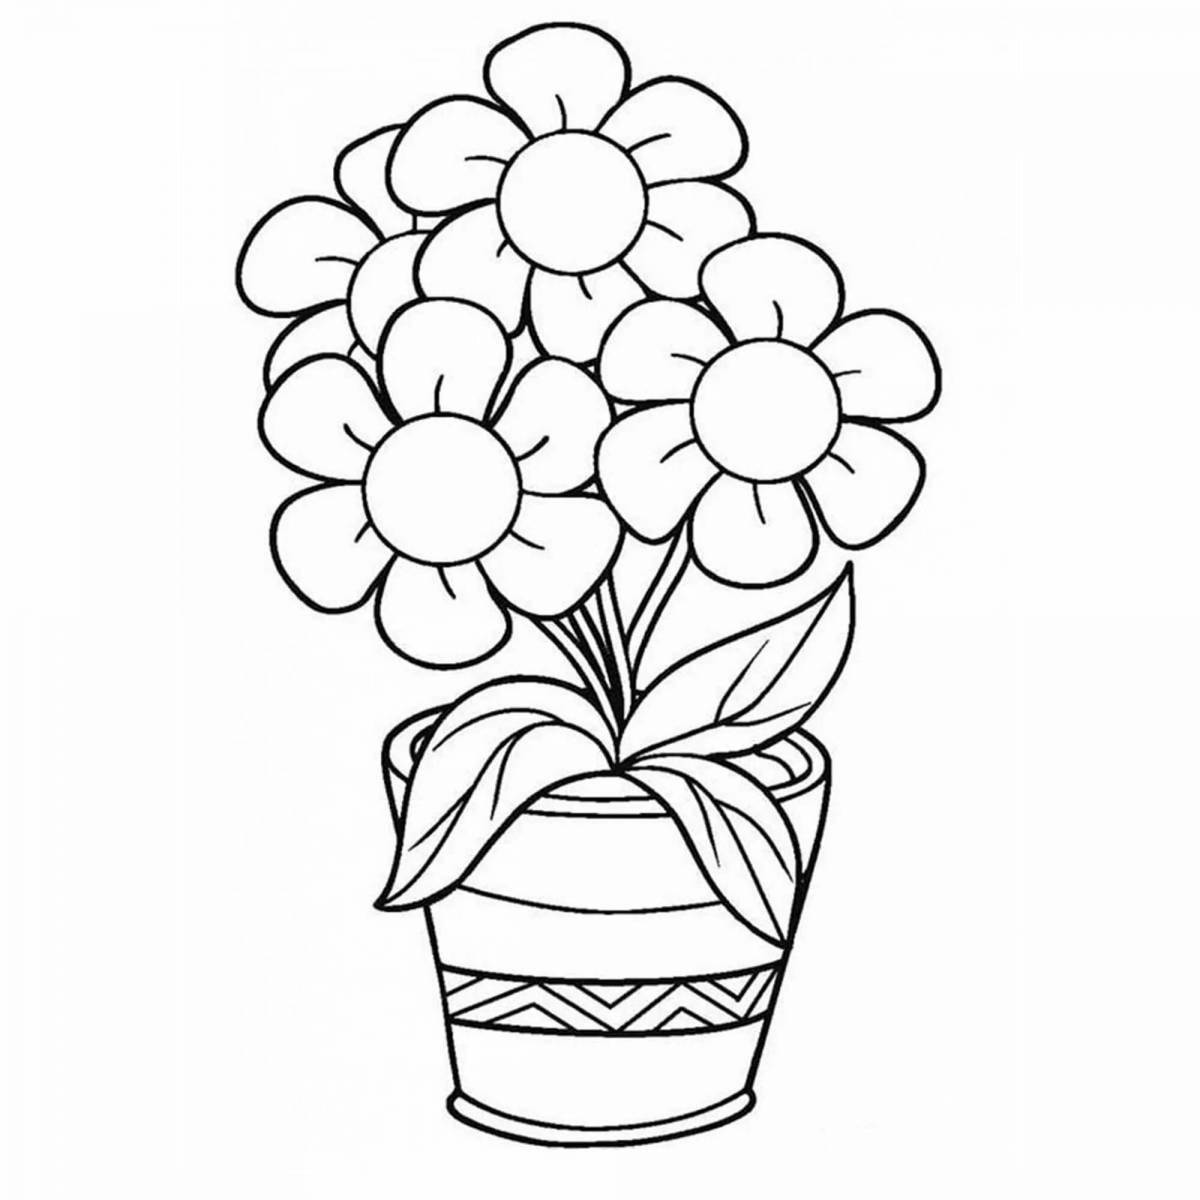 Coloring book playful bouquet of flowers in a vase